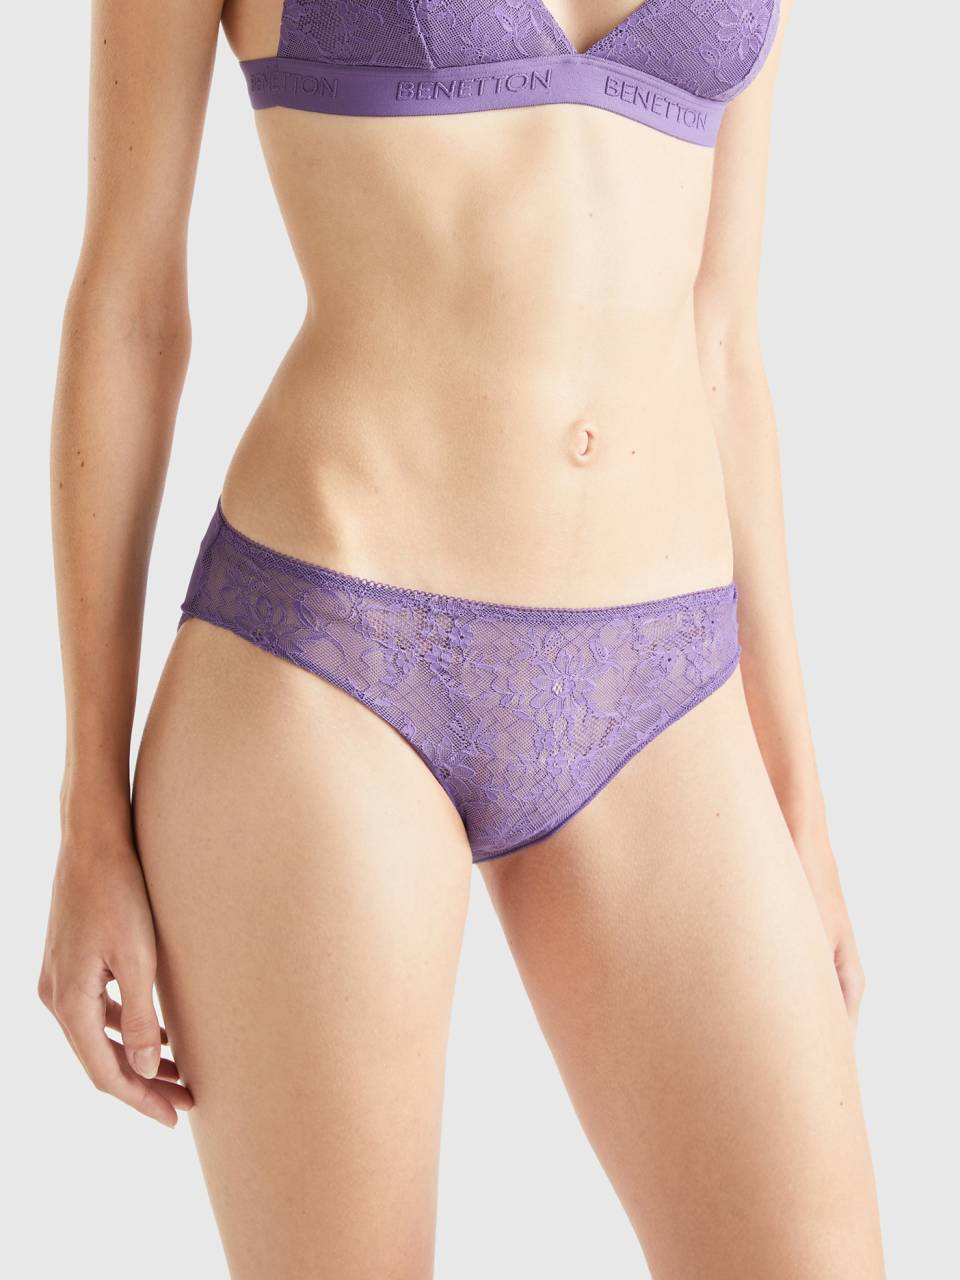 Benetton underwear in lace and microfiber - 36yz1s00z_0v7